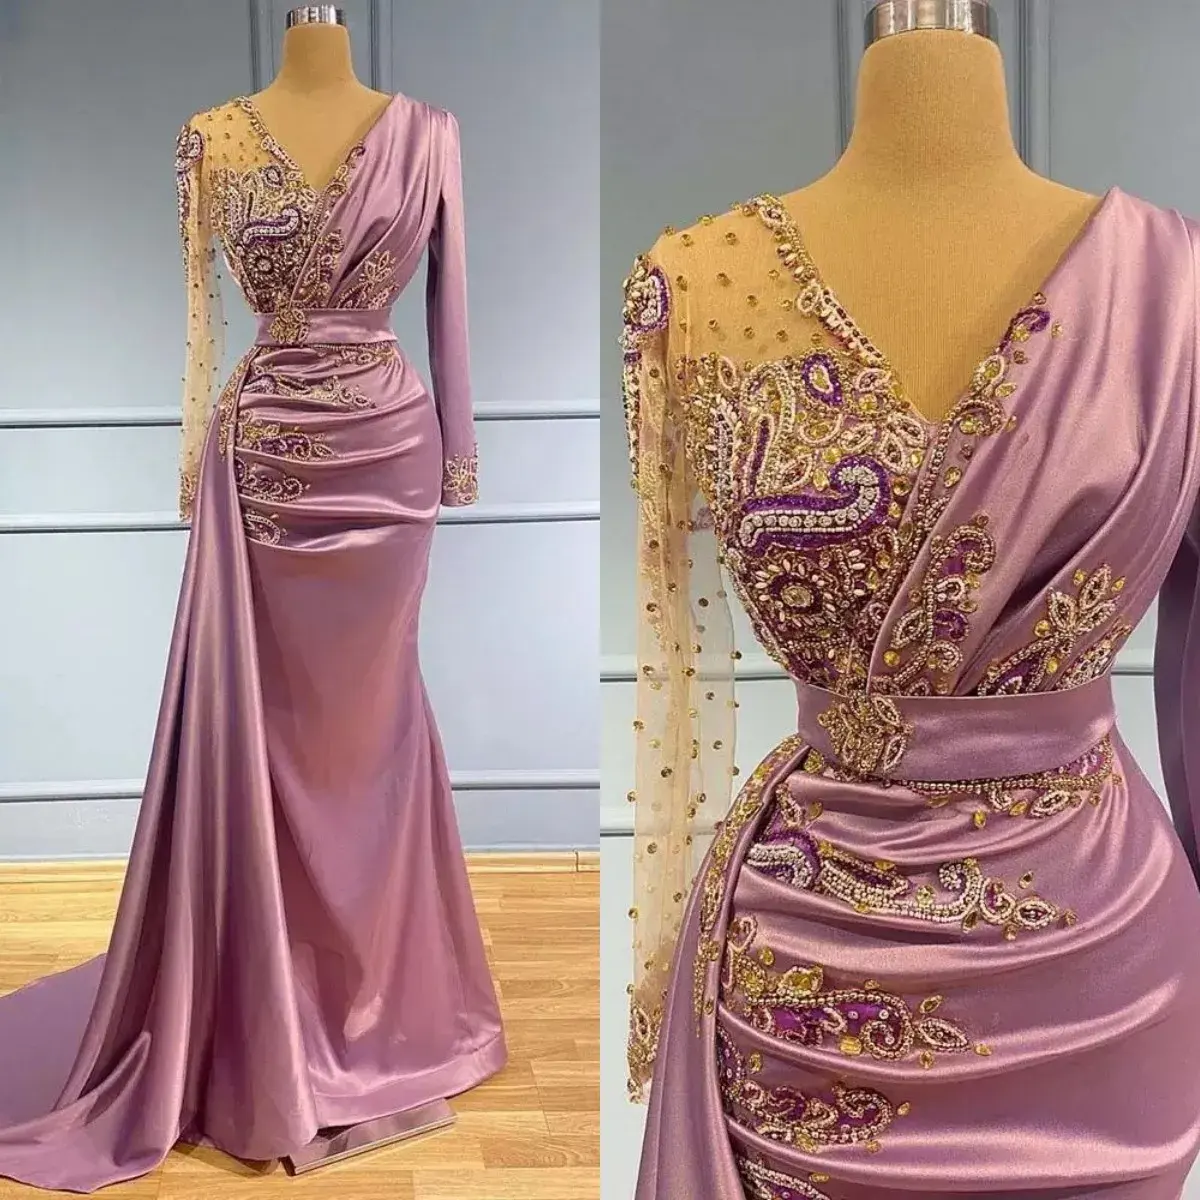 Light Purple Mermaid Prom Dresses V Neck Appliqued Beaded Long Sleeve Formal Evening Dress Party Reception Gowns MP674